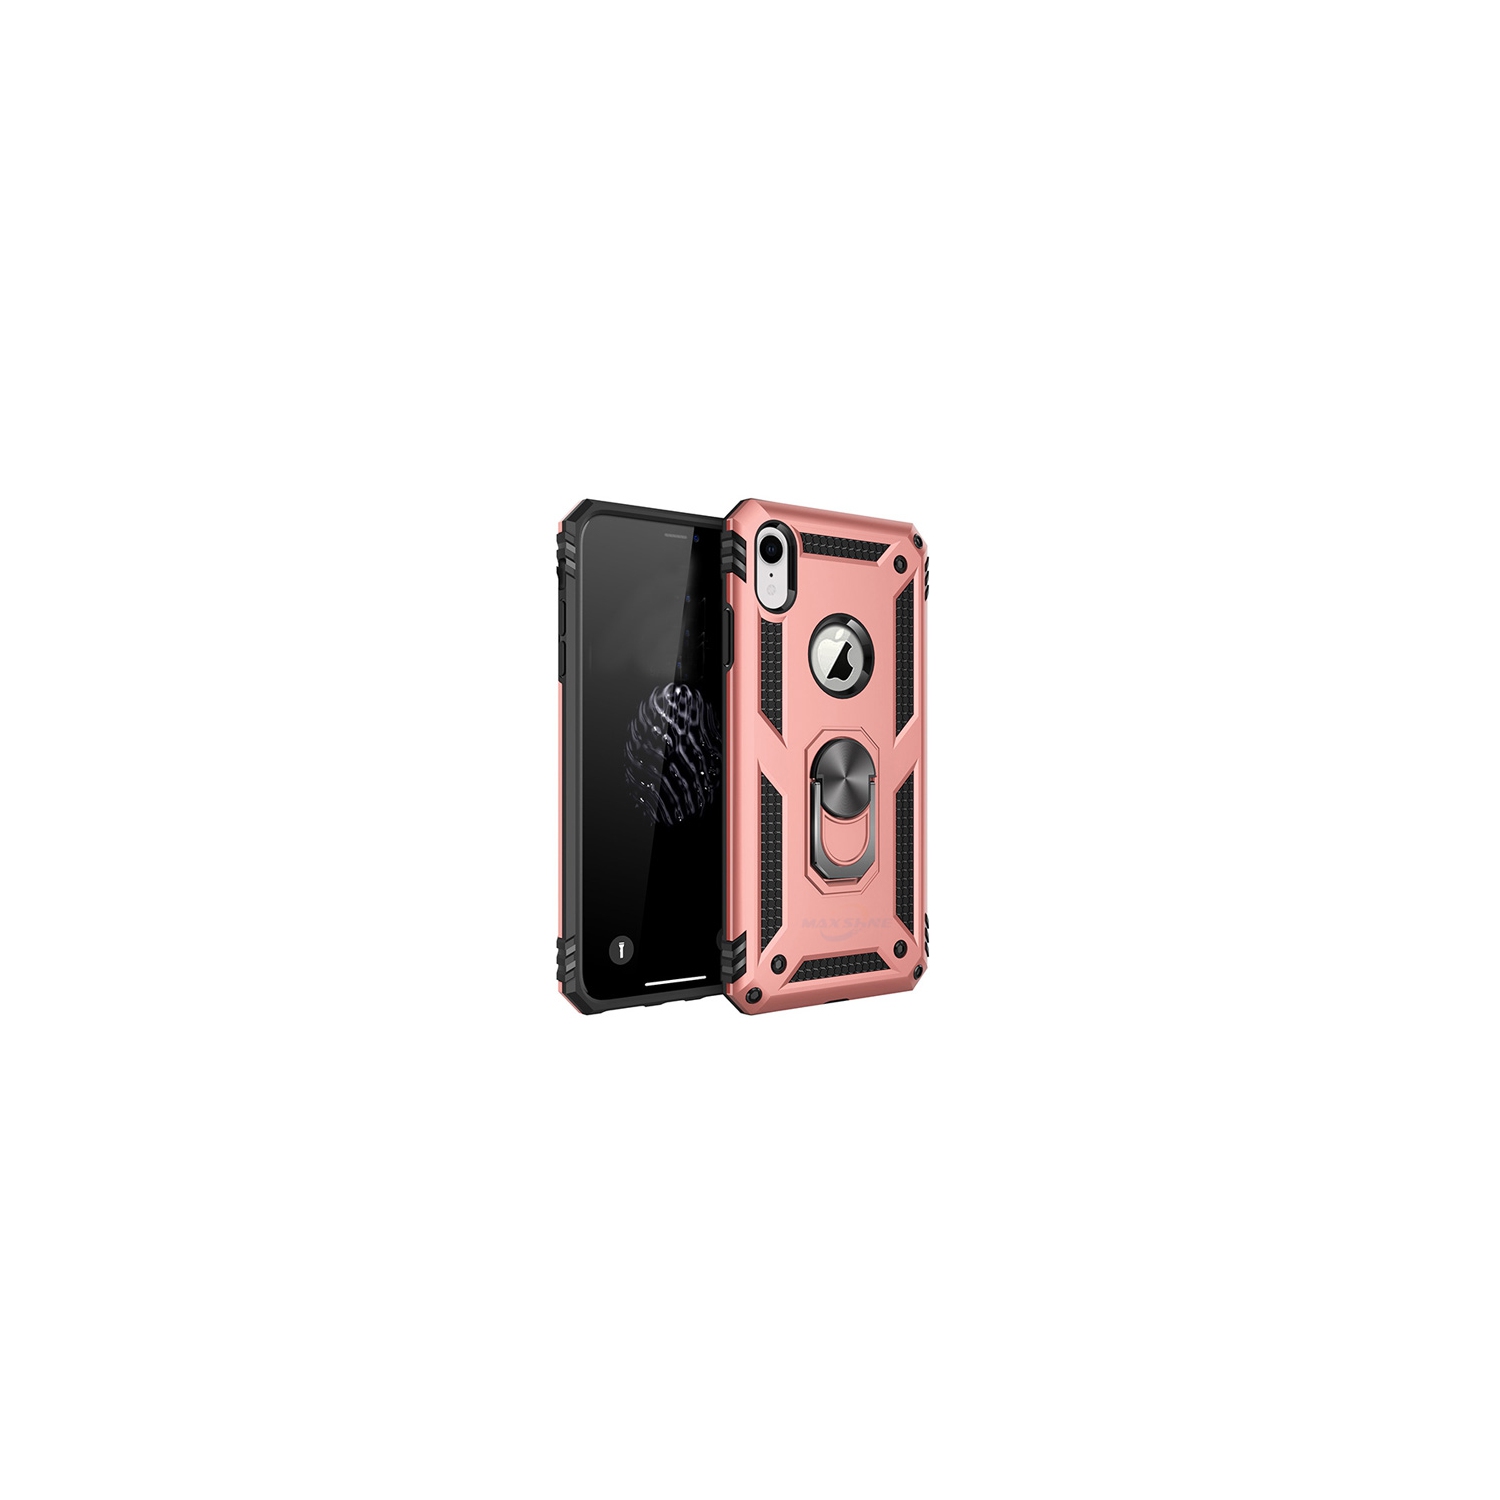 【CSmart】 Anti-Drop Hybrid Magnetic Hard Armor Case with Ring Holder for iPhone X / iPhone XS, Rose Gold